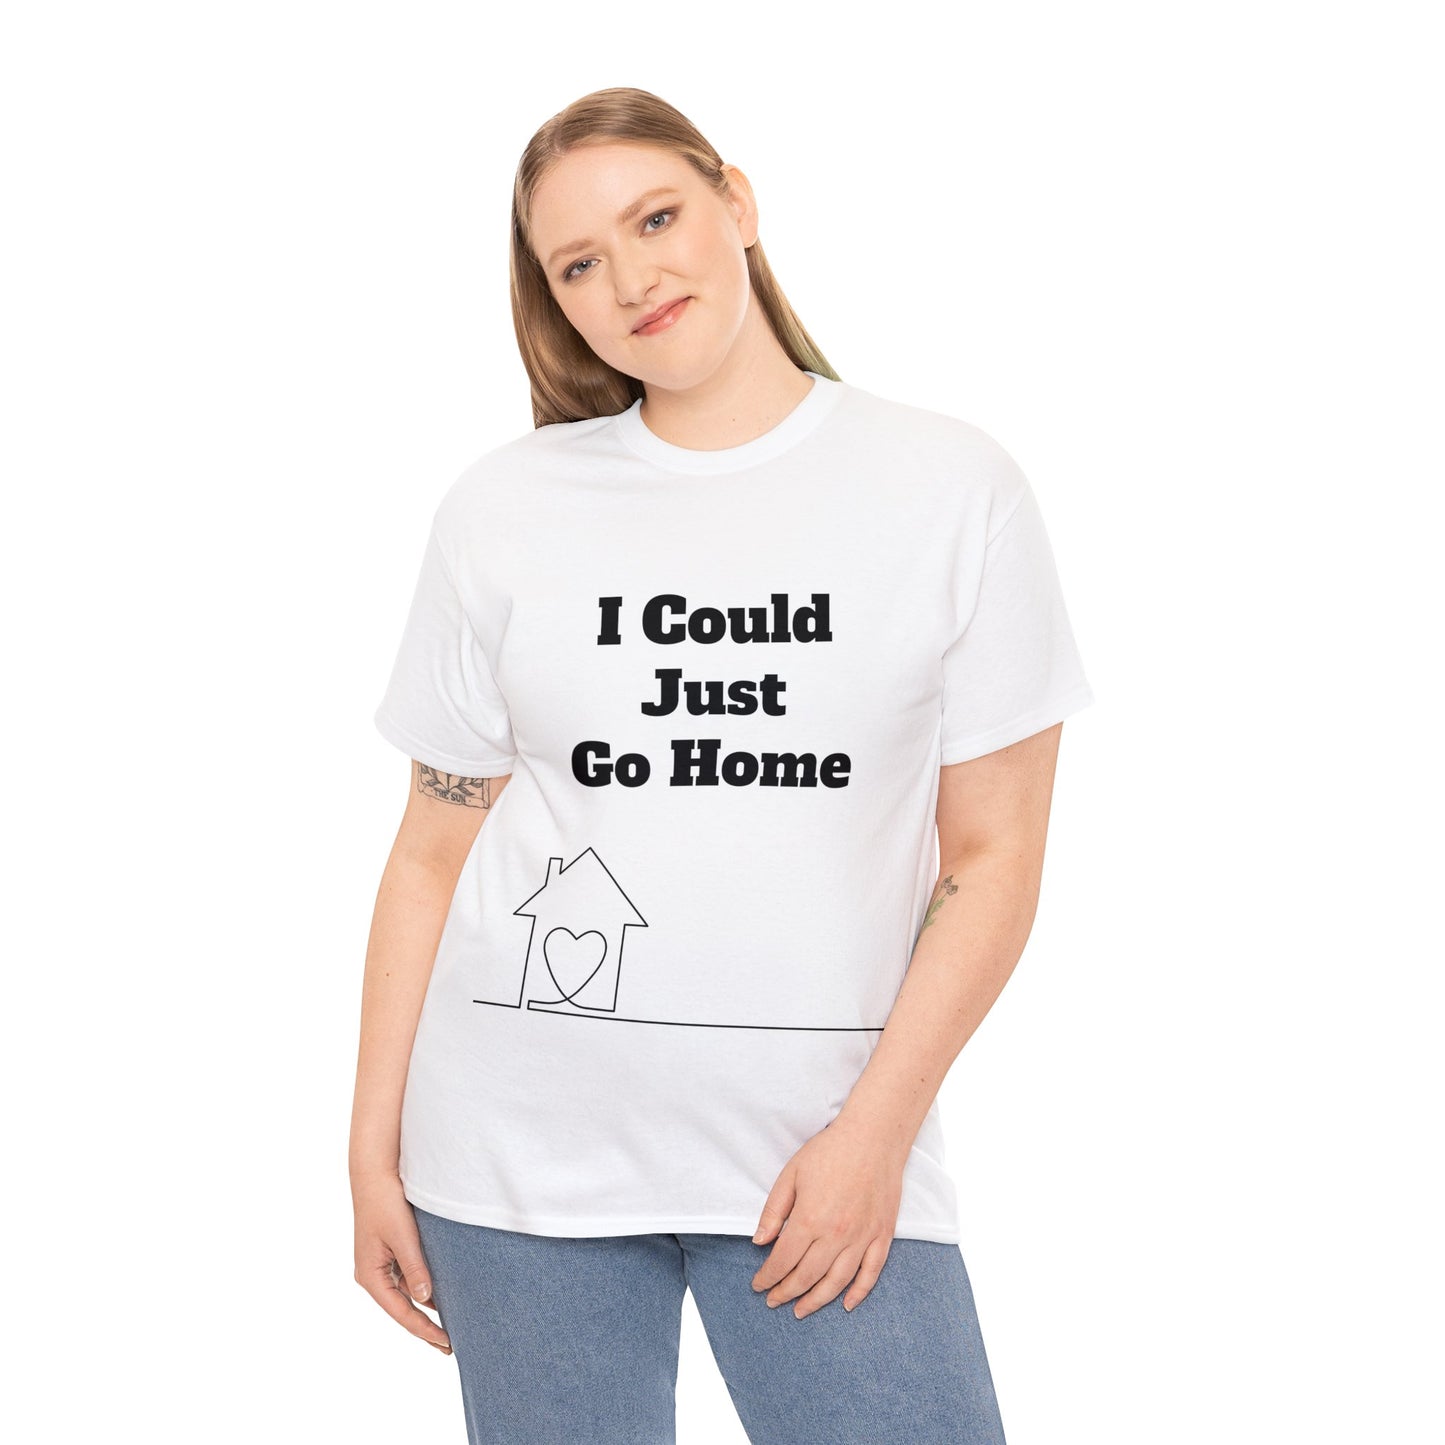 I Could Just Go Home Tee (White)